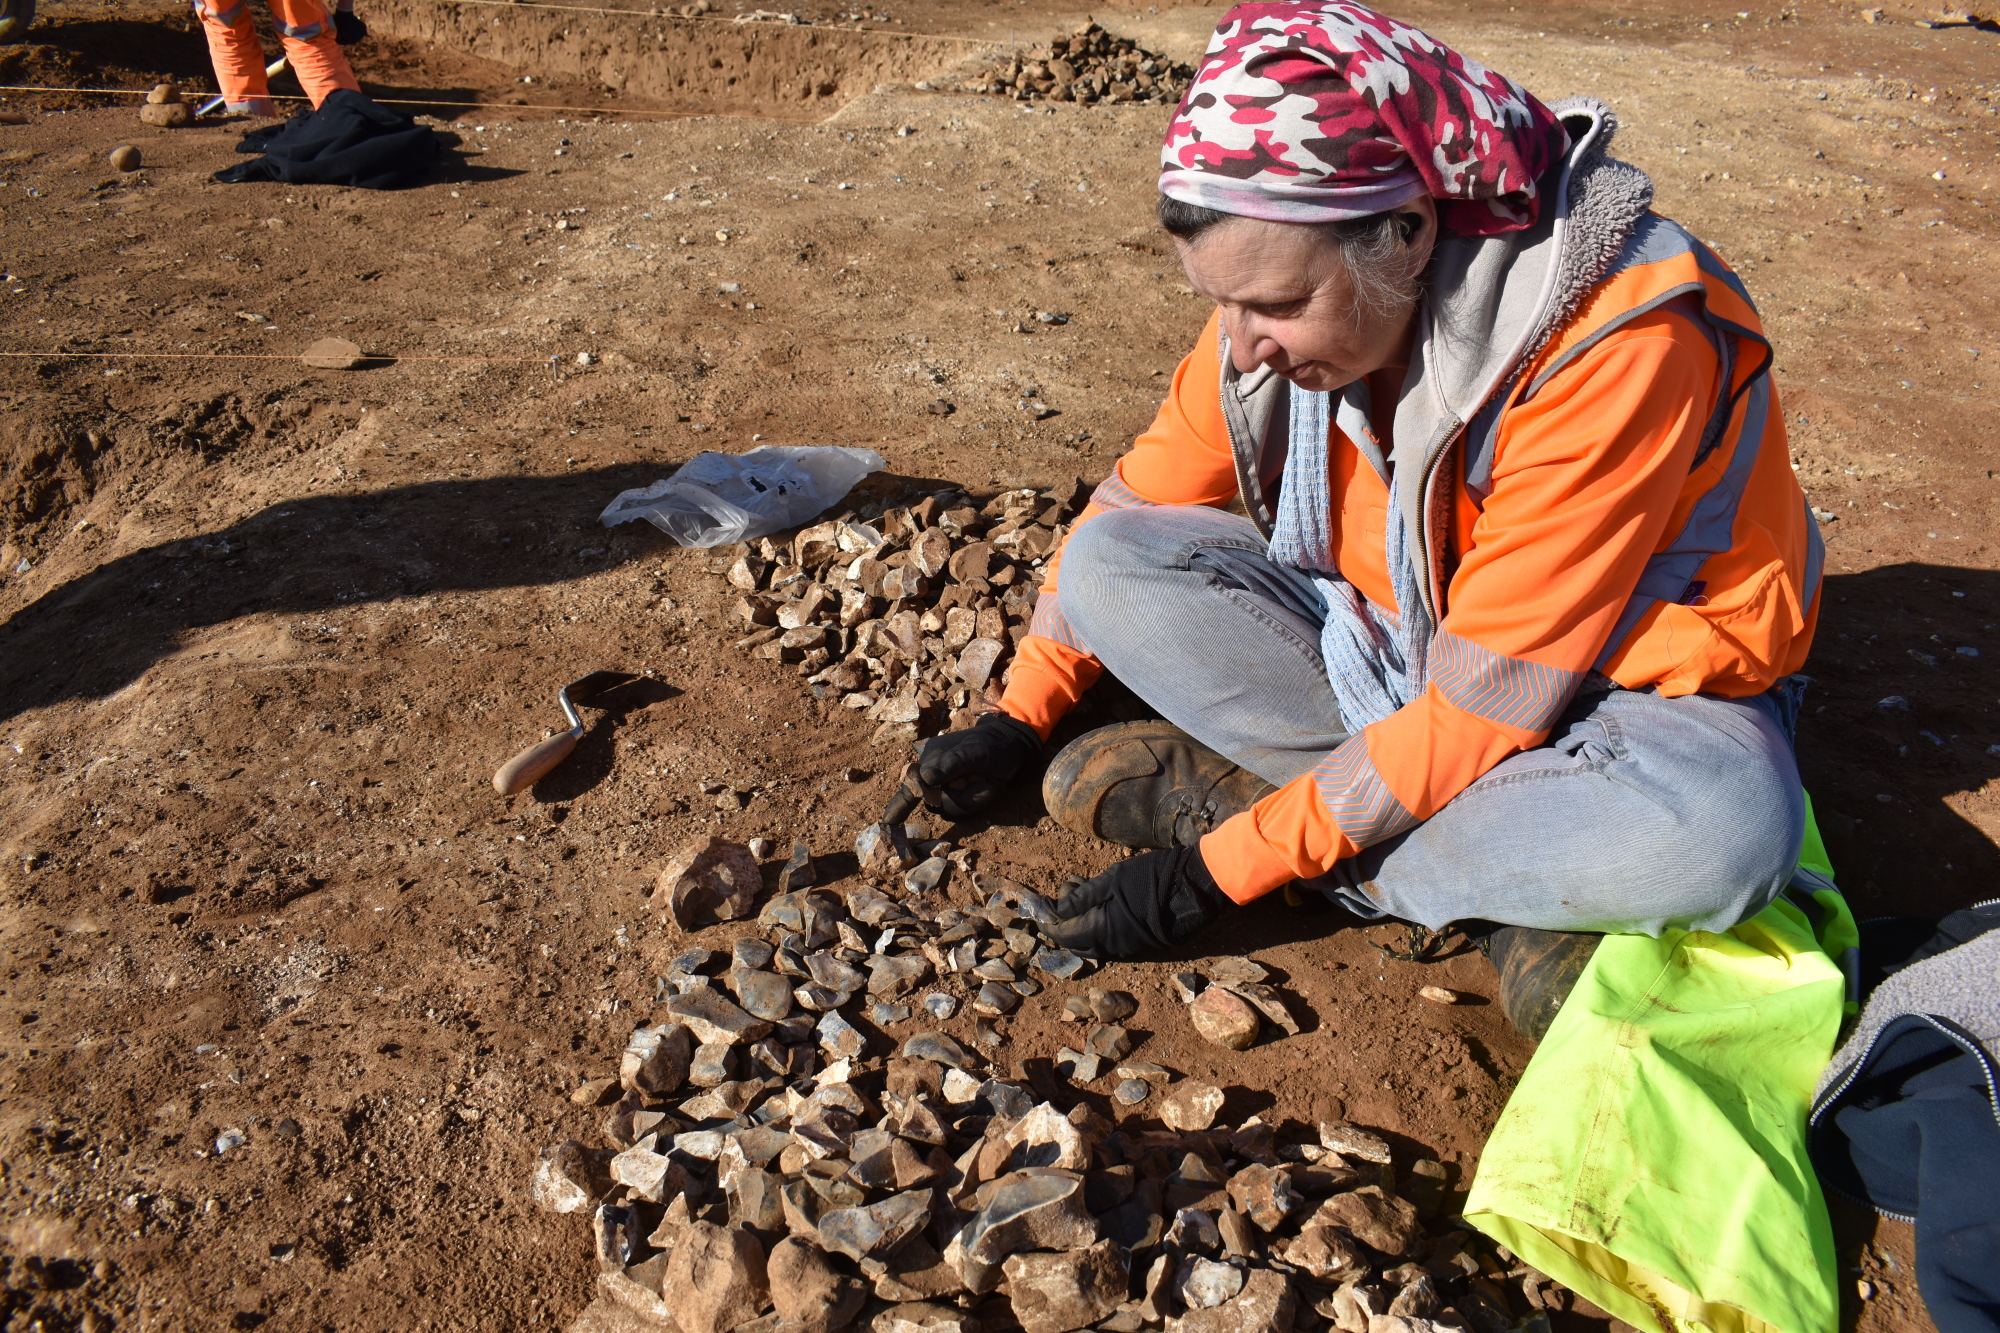 An archaeologist sits cross legged surrounded by worked flints which she is checking.